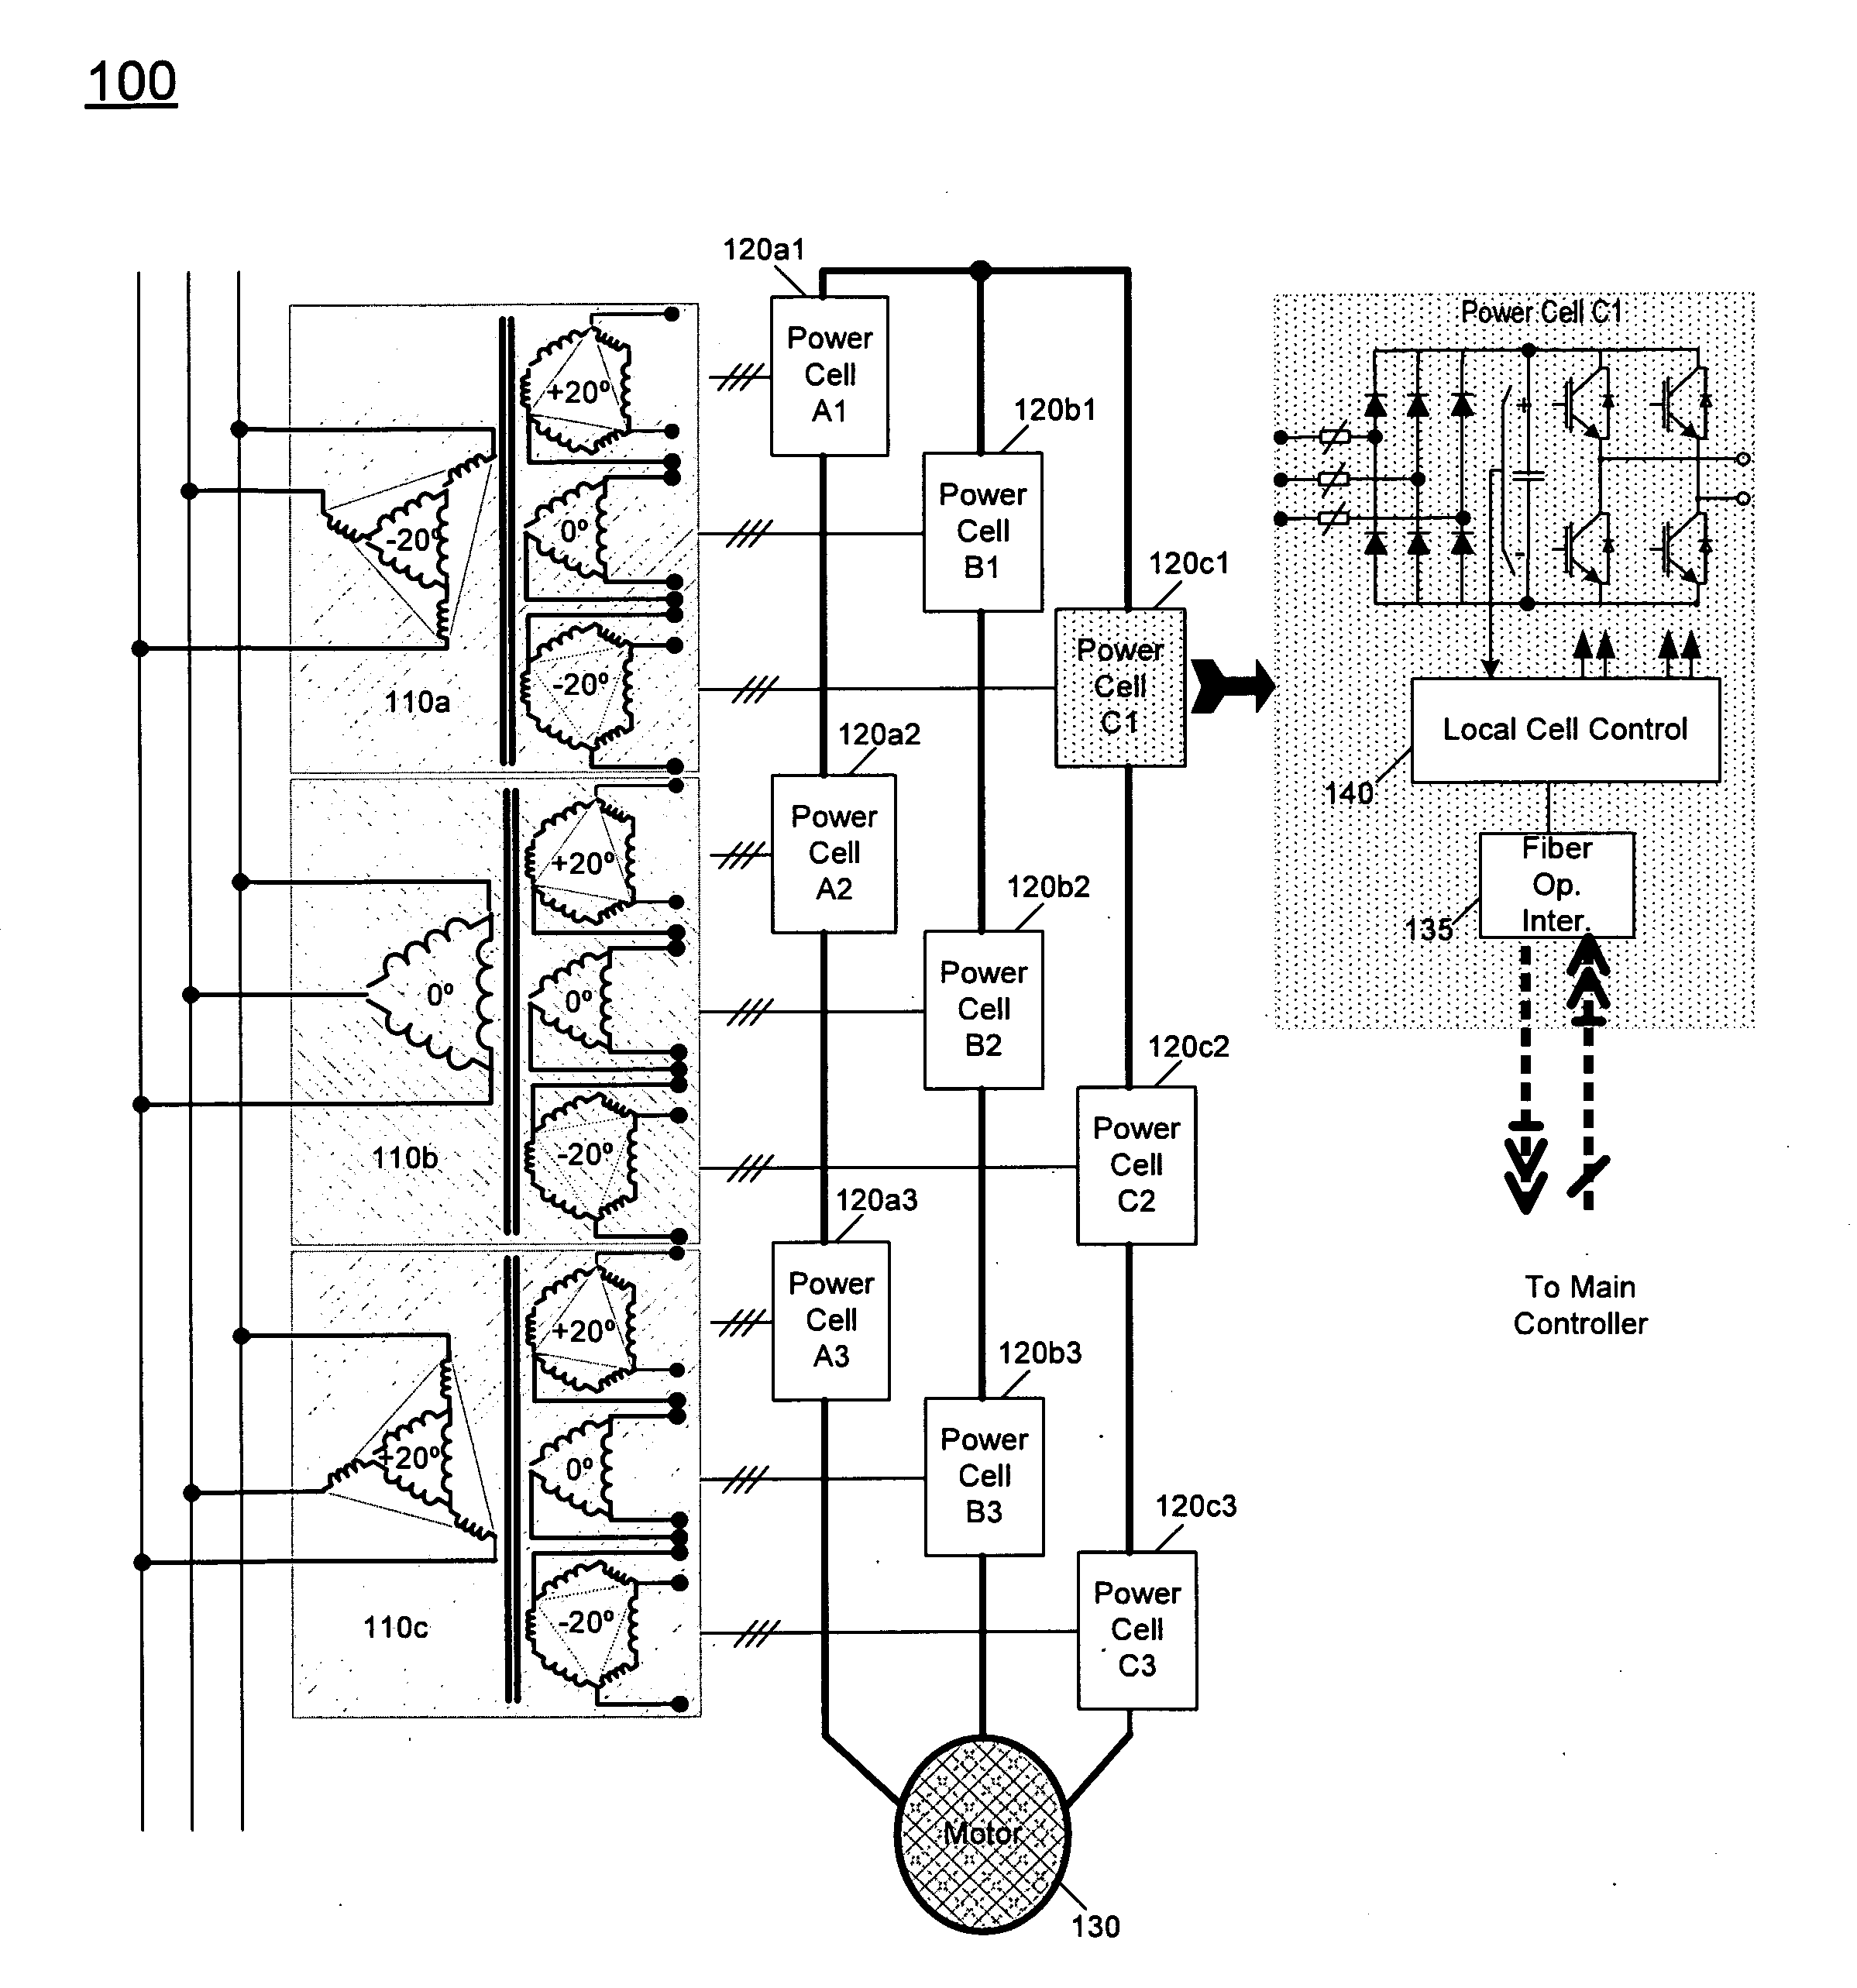 Pre-Charging An Inverter Using An Auxiliary Winding